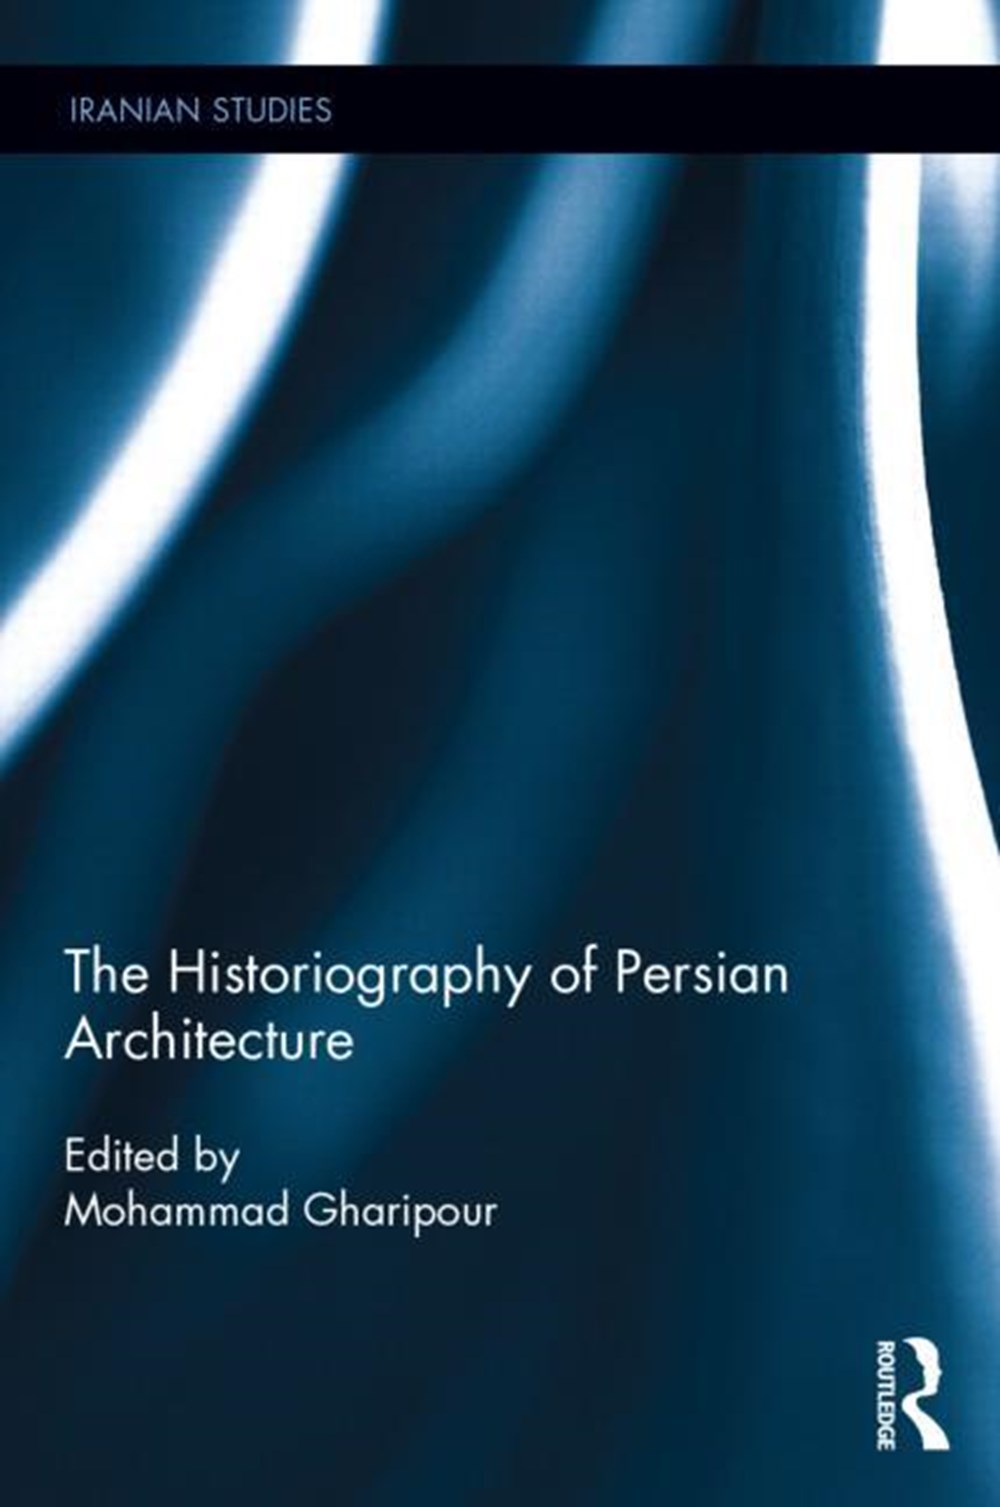 Historiography of Persian Architecture